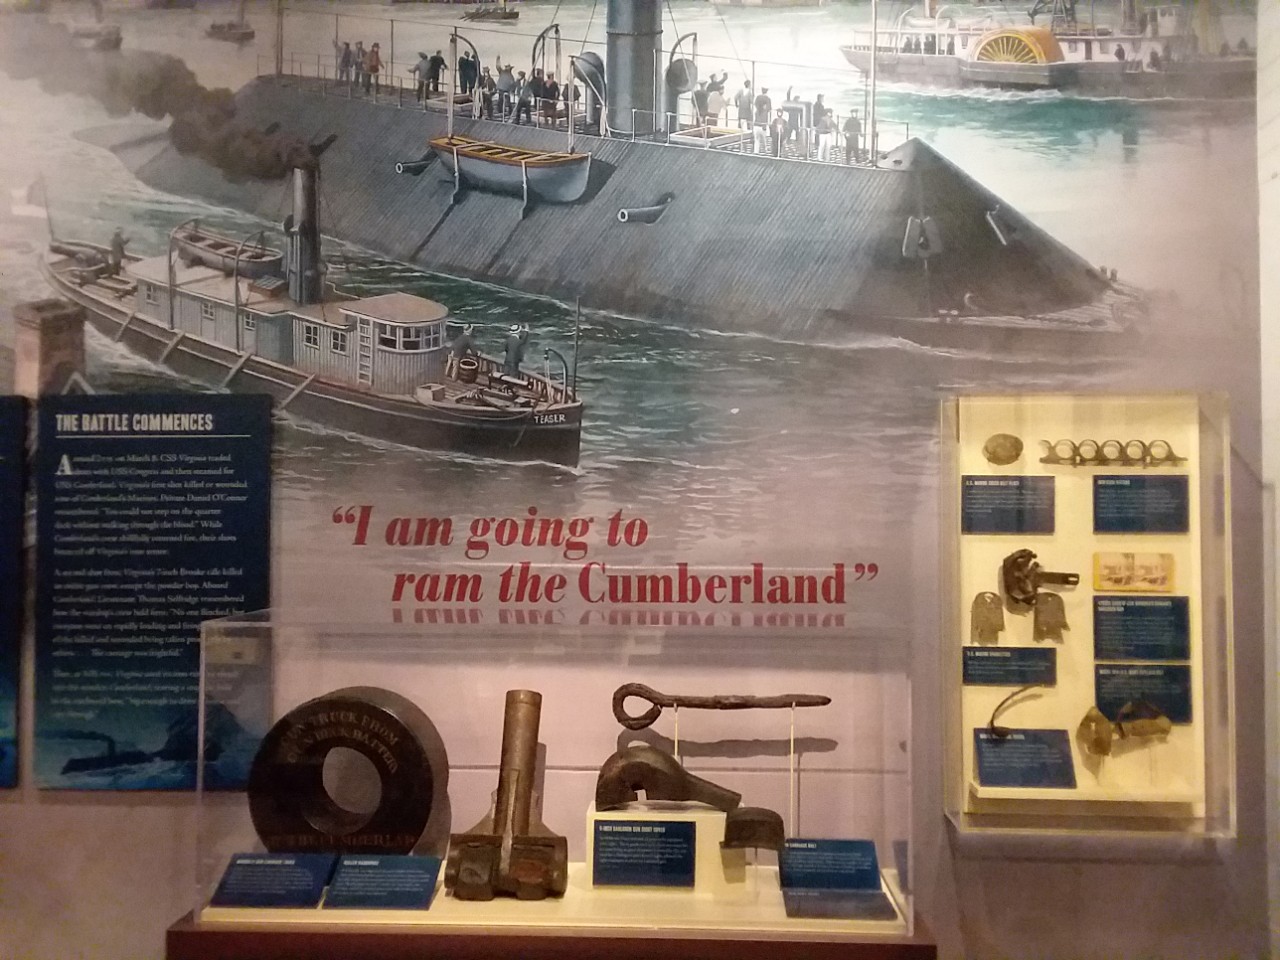 image of artifacts and ironclad ship in the river